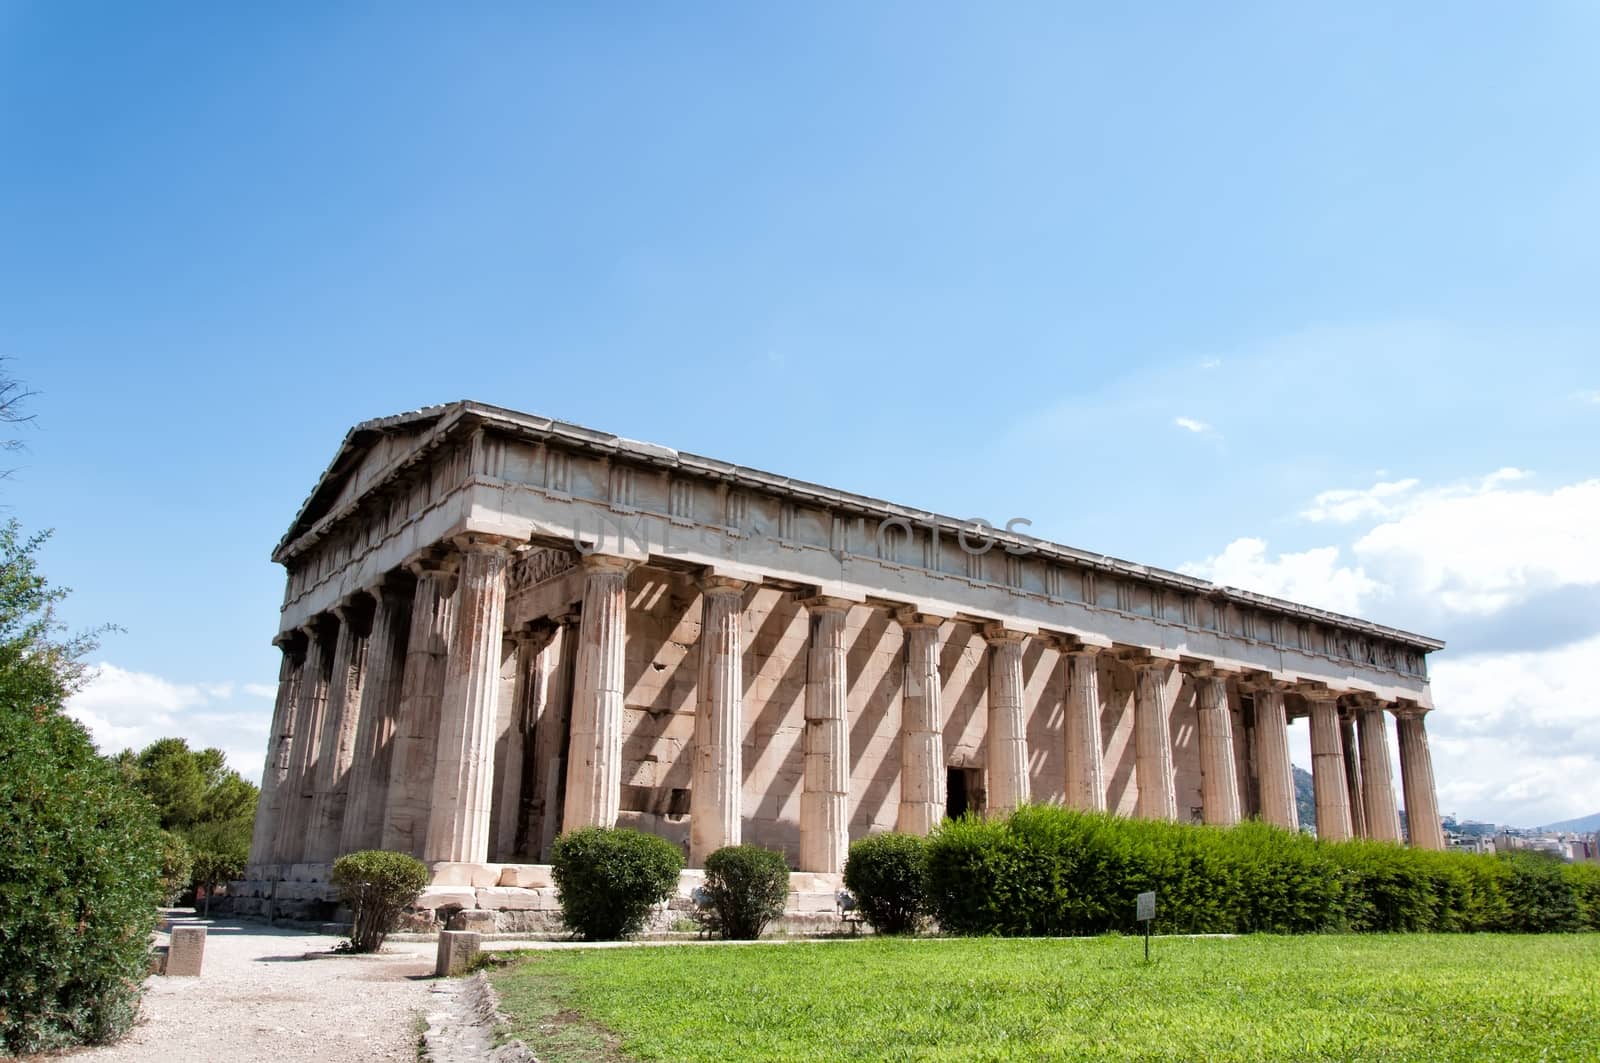 The Temple of Hephaestus is a beautifully preserved Greek temple overlooking the Agora of Athens.